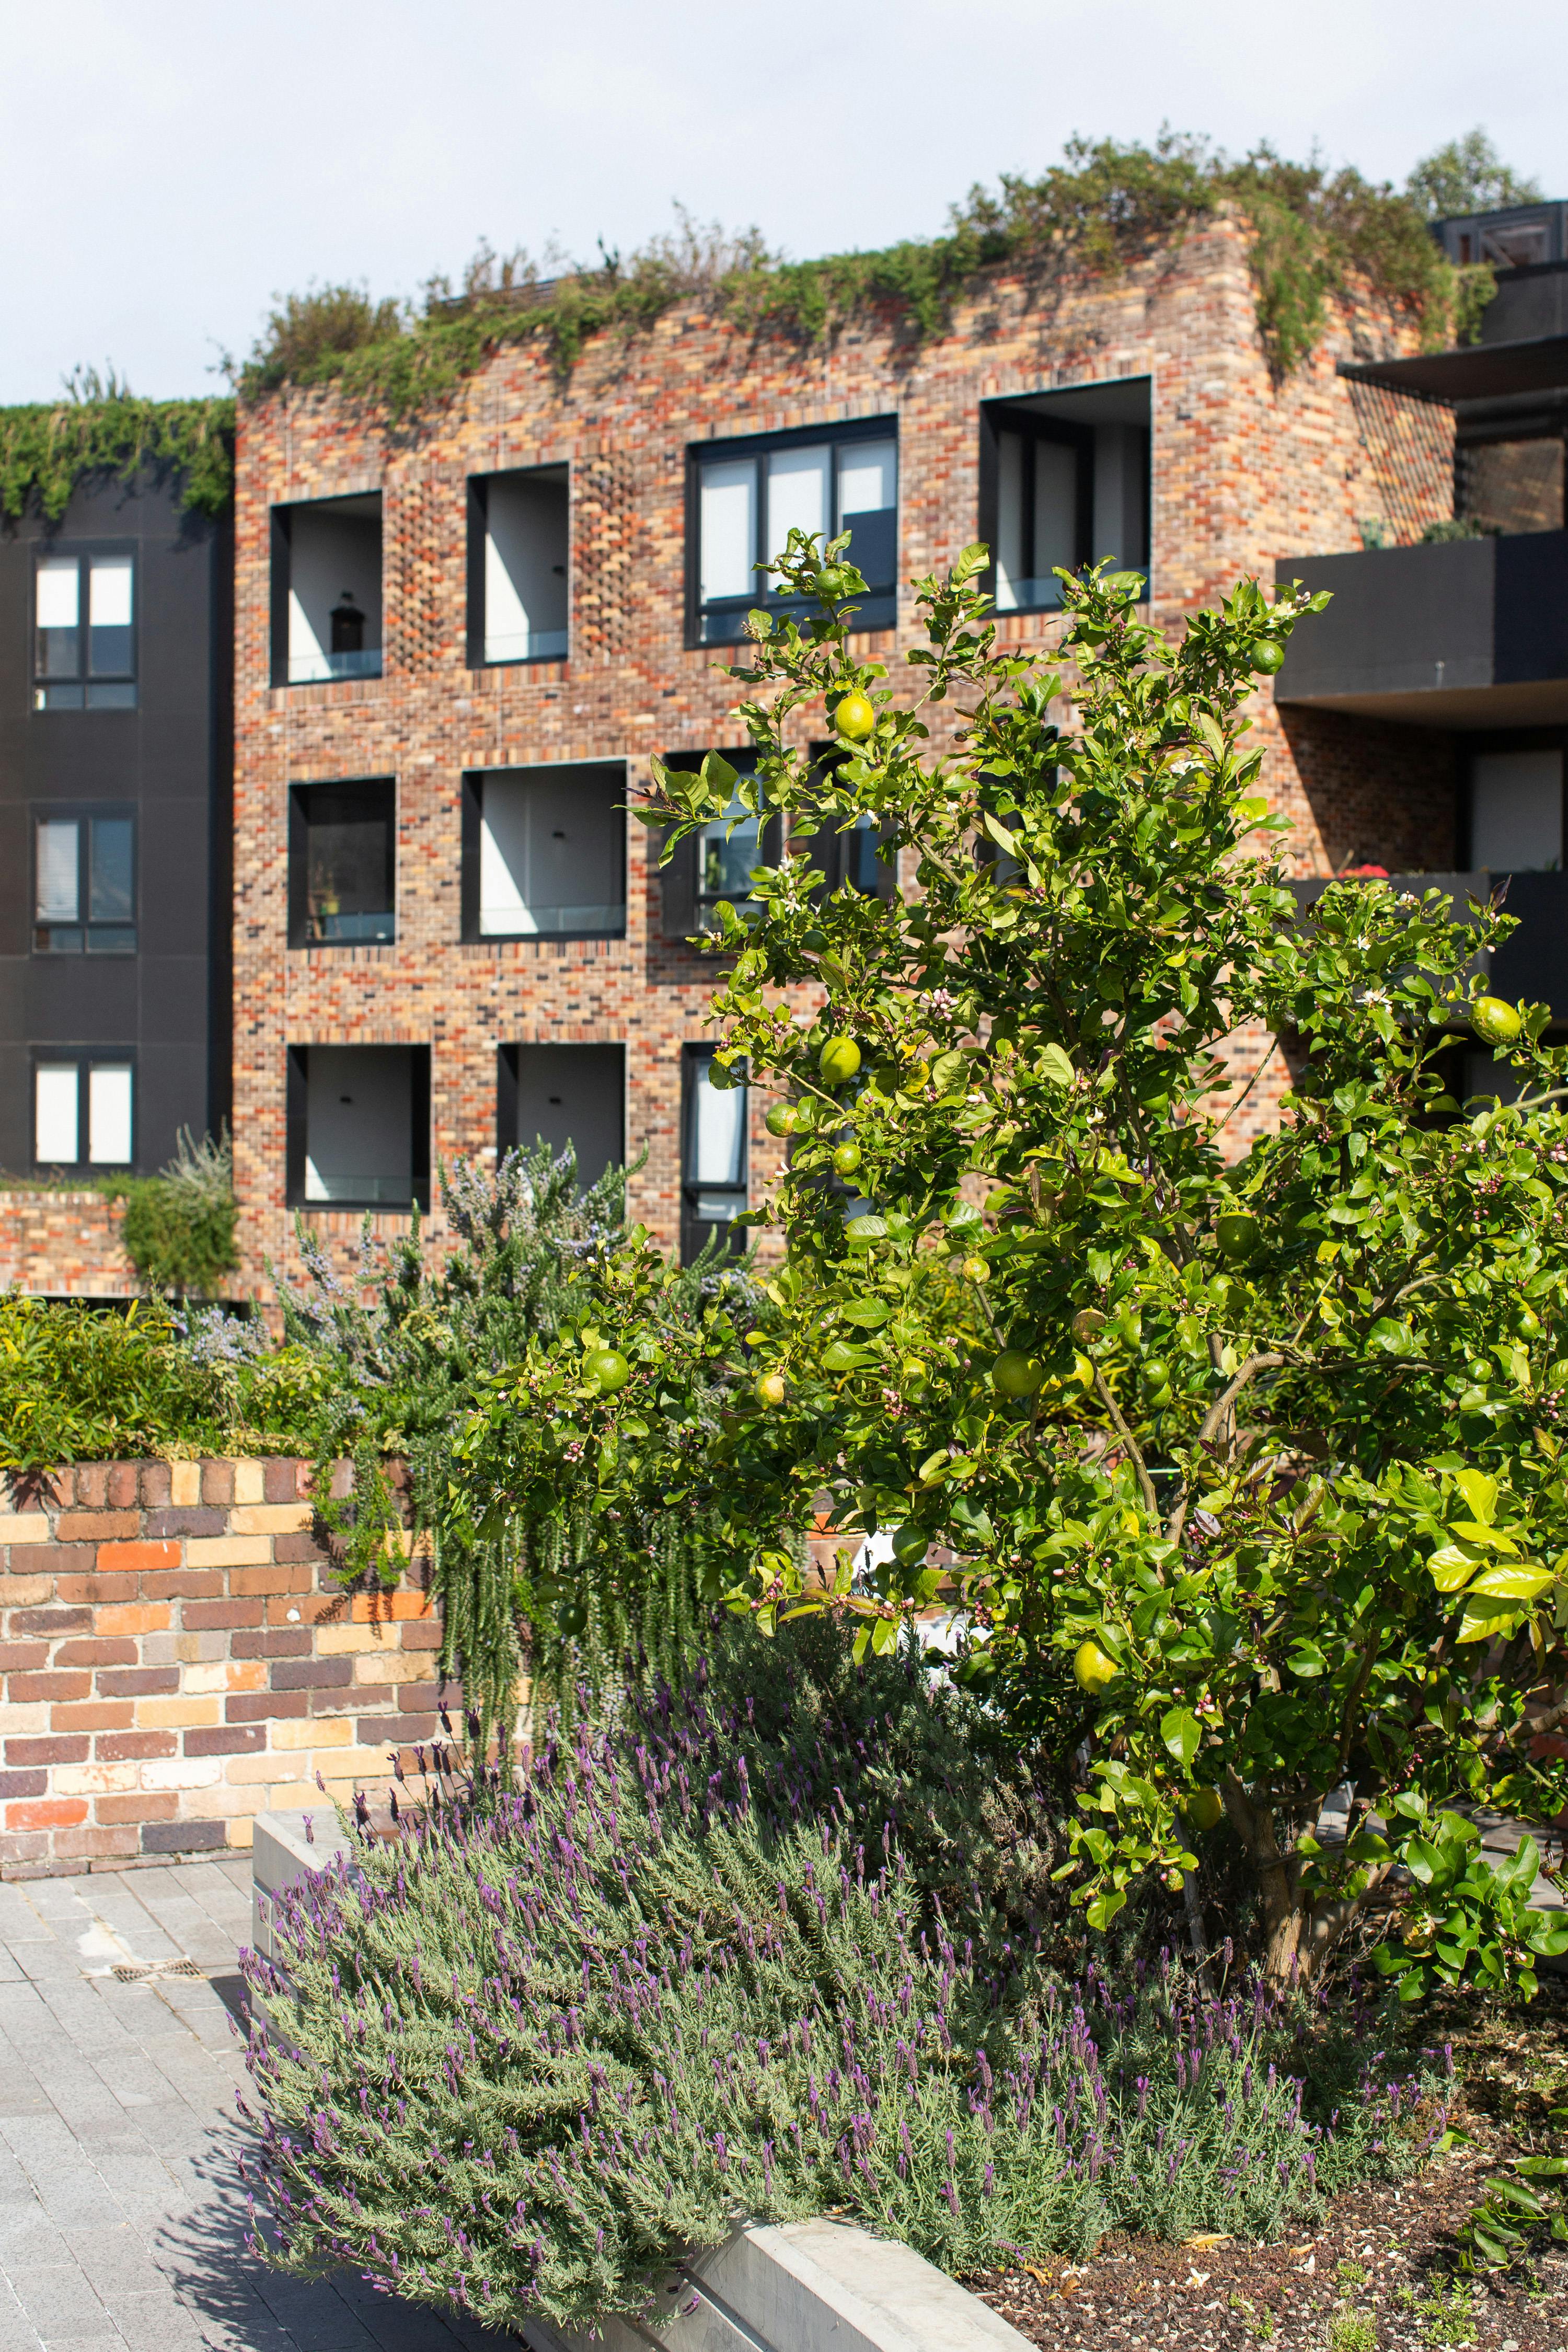 A photograph of a citrus tree, surrounded by herbs, in a communal roof terrace. More of the recycled brick apartment building, and green roof are in the background.